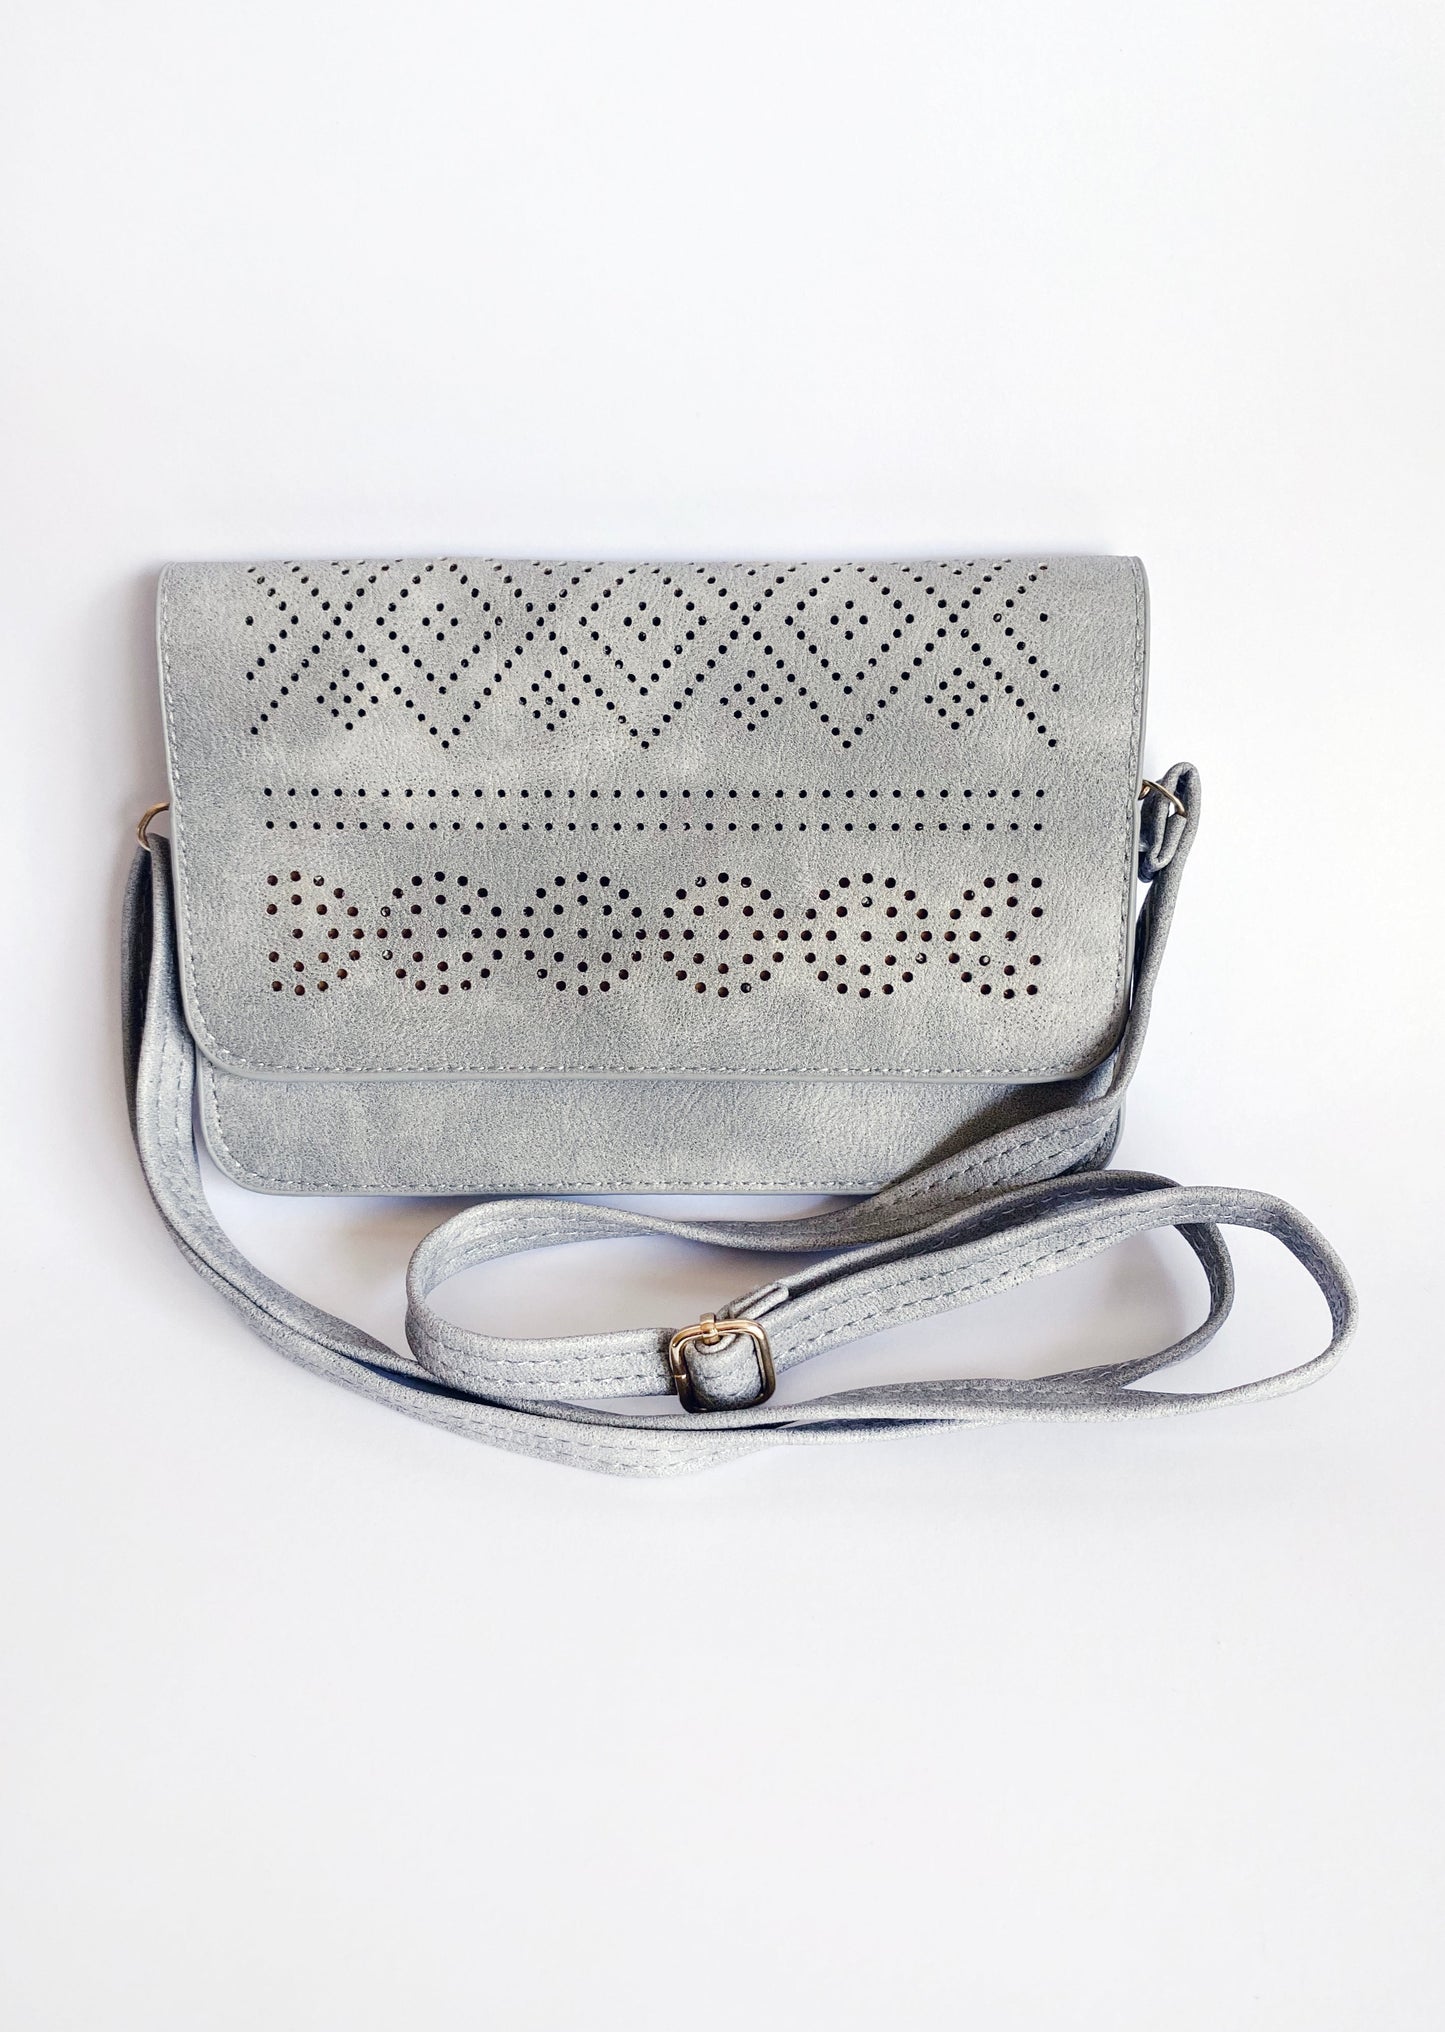 Perforated Purse with Straps